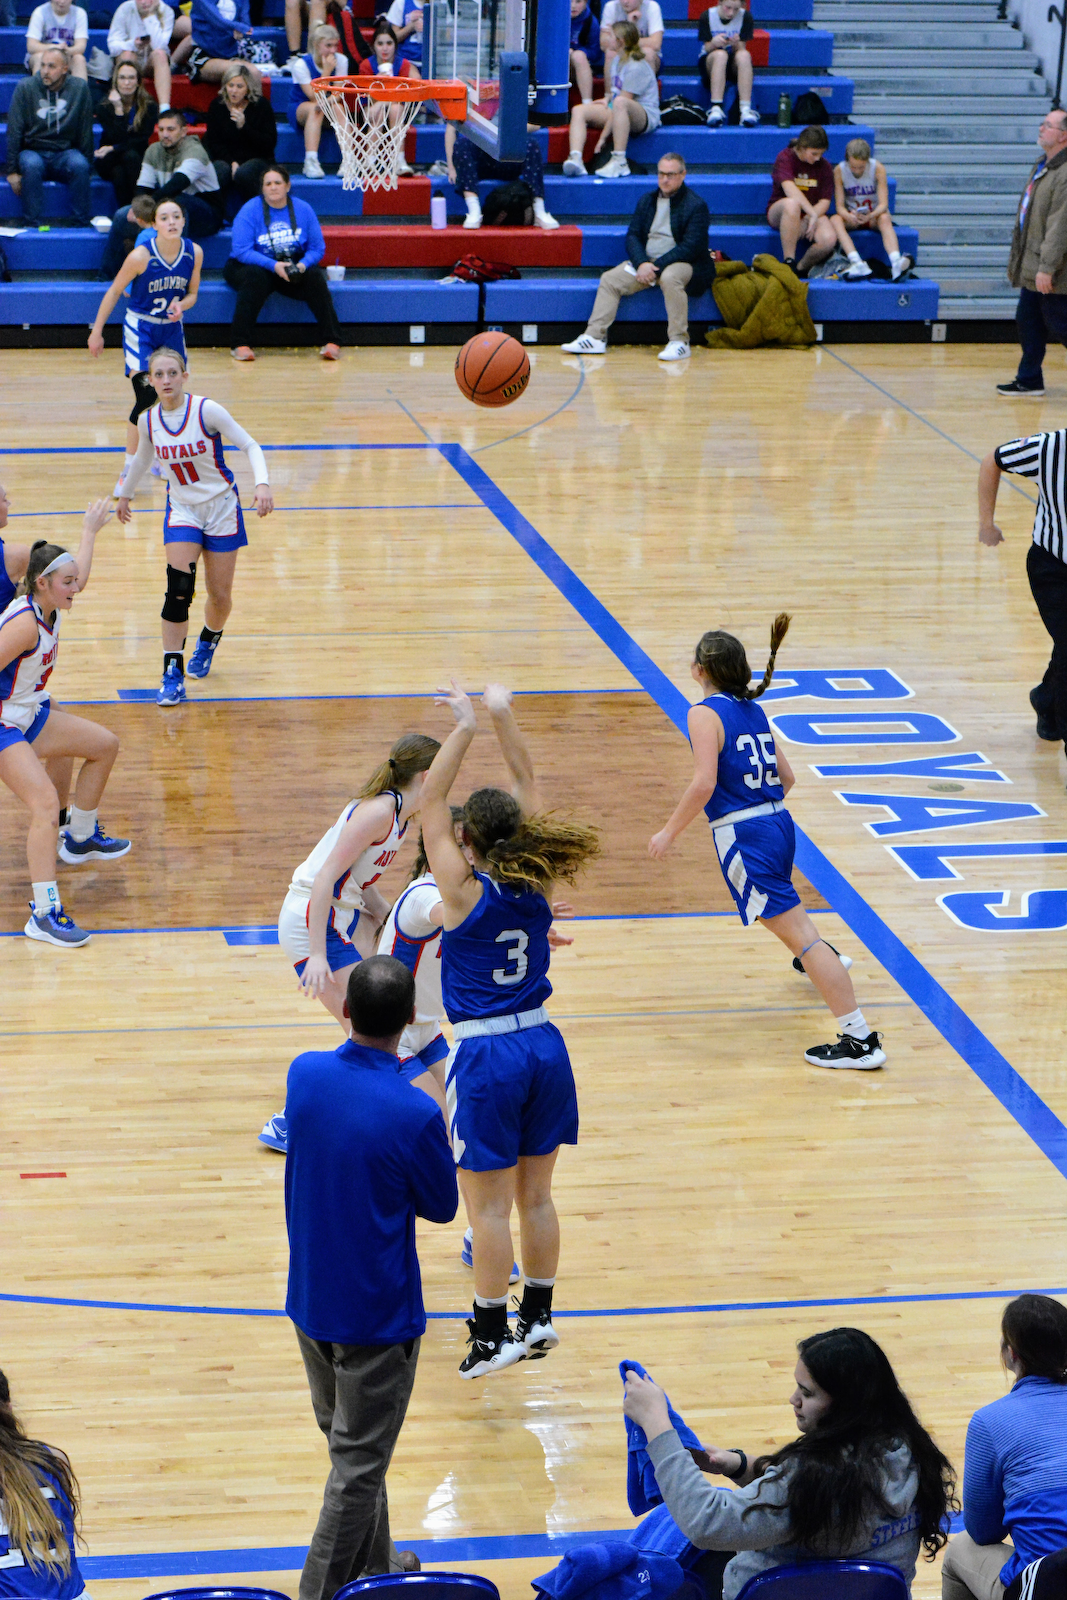 2022-23 Girls Basketball at Roncalli 1-26-23 gallery cover photo